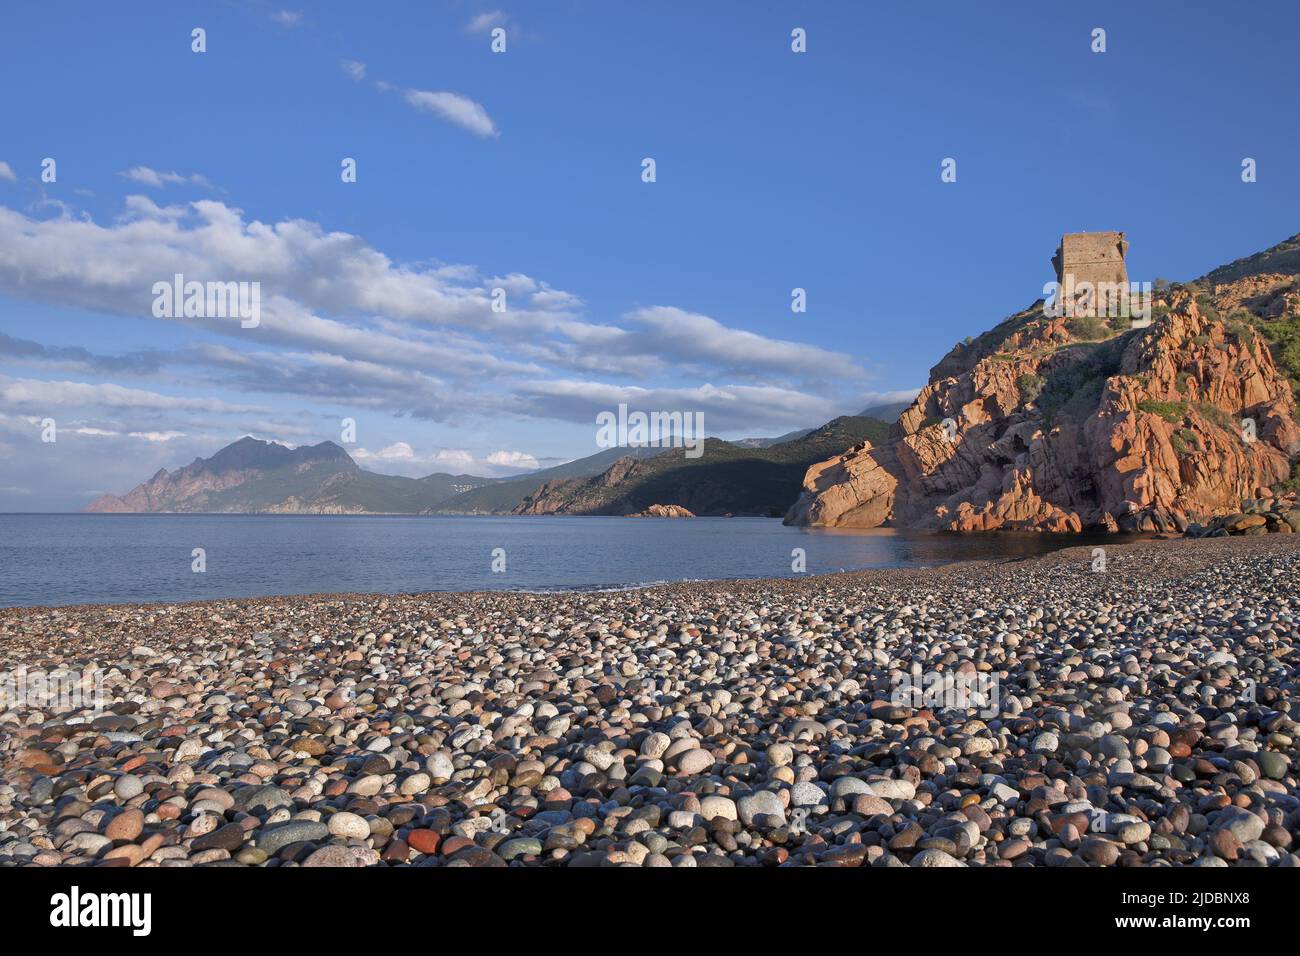 France, Corsica Gulf of Porto, the Genoese tower from the pebble beach Stock Photo